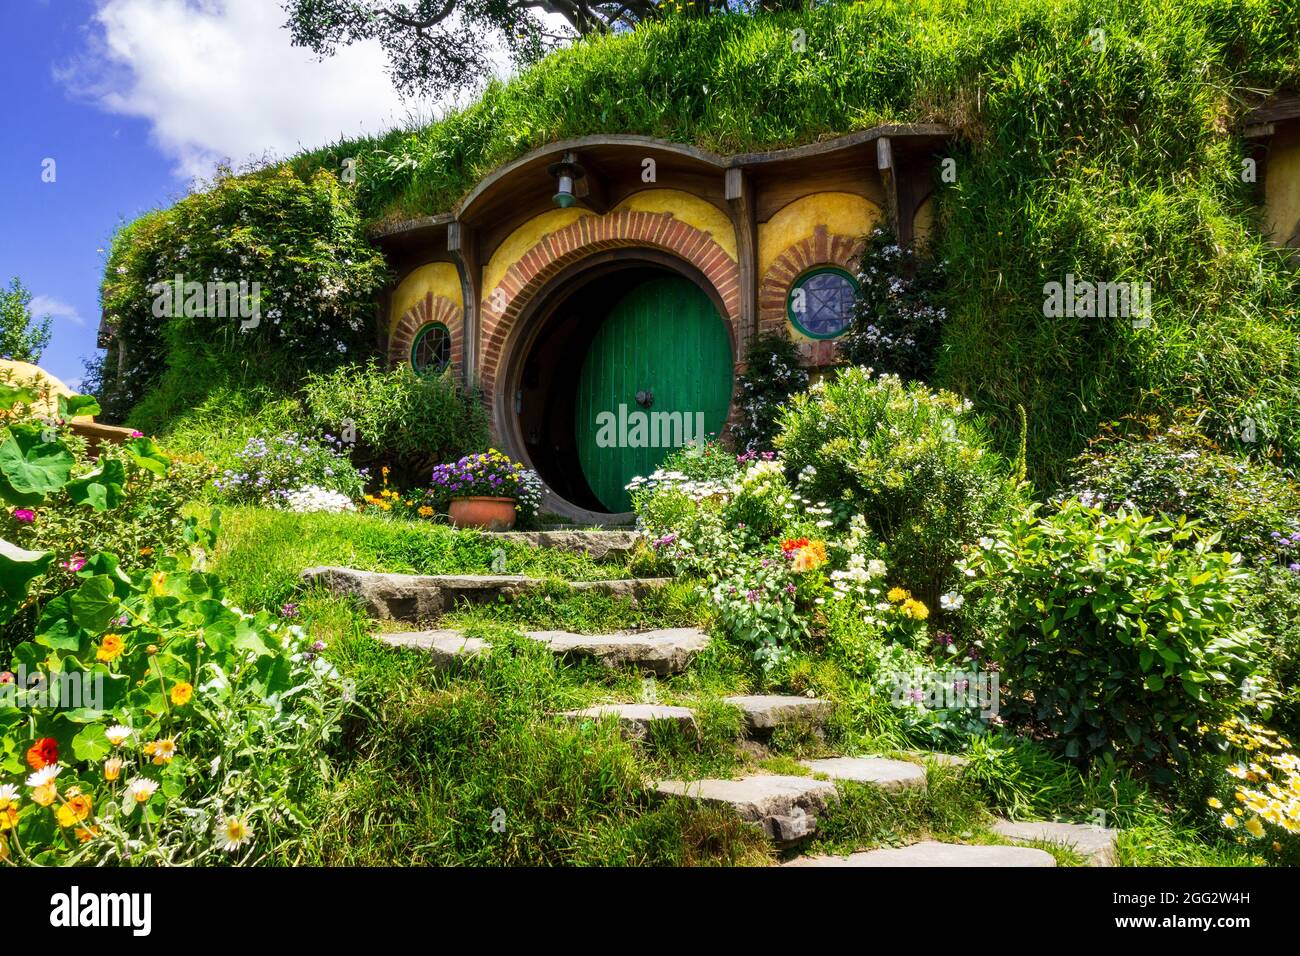 Bilbo Baggins Hobbit Hole Home On The Hobbiton Movie Set For The Lord Of The Rings Movie Trilogy In Matamata New Zealand A Tourist Attraction Stock Photo